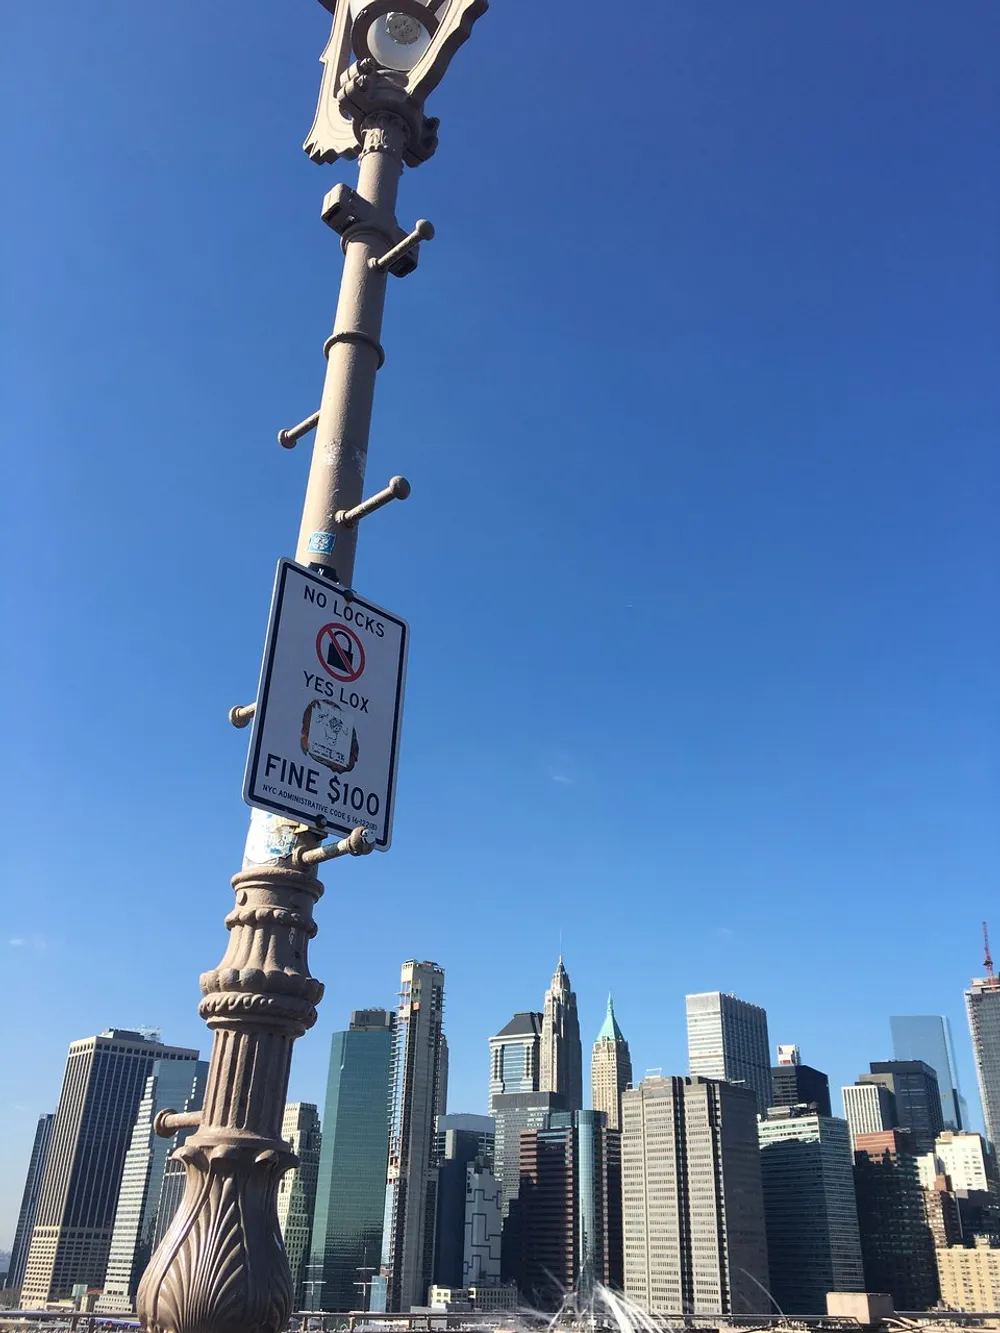 The image shows a lamppost with two conflicting signs about locks one stating NO LOCKS the other YES LOX with a humorous fine warning set against a clear blue sky and a backdrop of a city skyline